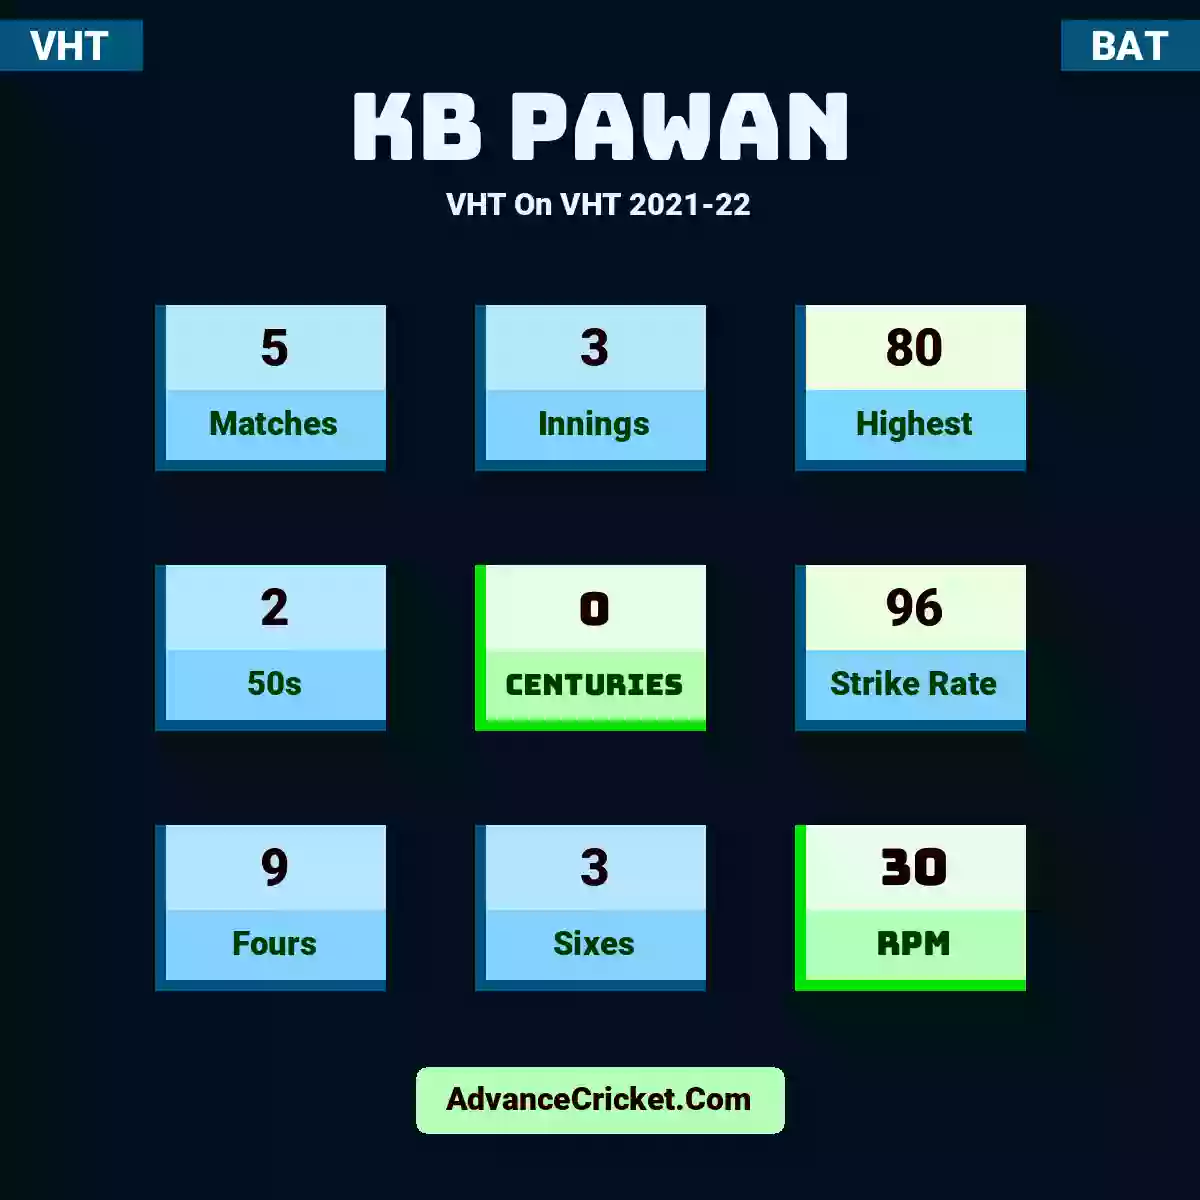 KB Pawan VHT  On VHT 2021-22, KB Pawan played 5 matches, scored 80 runs as highest, 2 half-centuries, and 0 centuries, with a strike rate of 96. K.Pawan hit 9 fours and 3 sixes, with an RPM of 30.